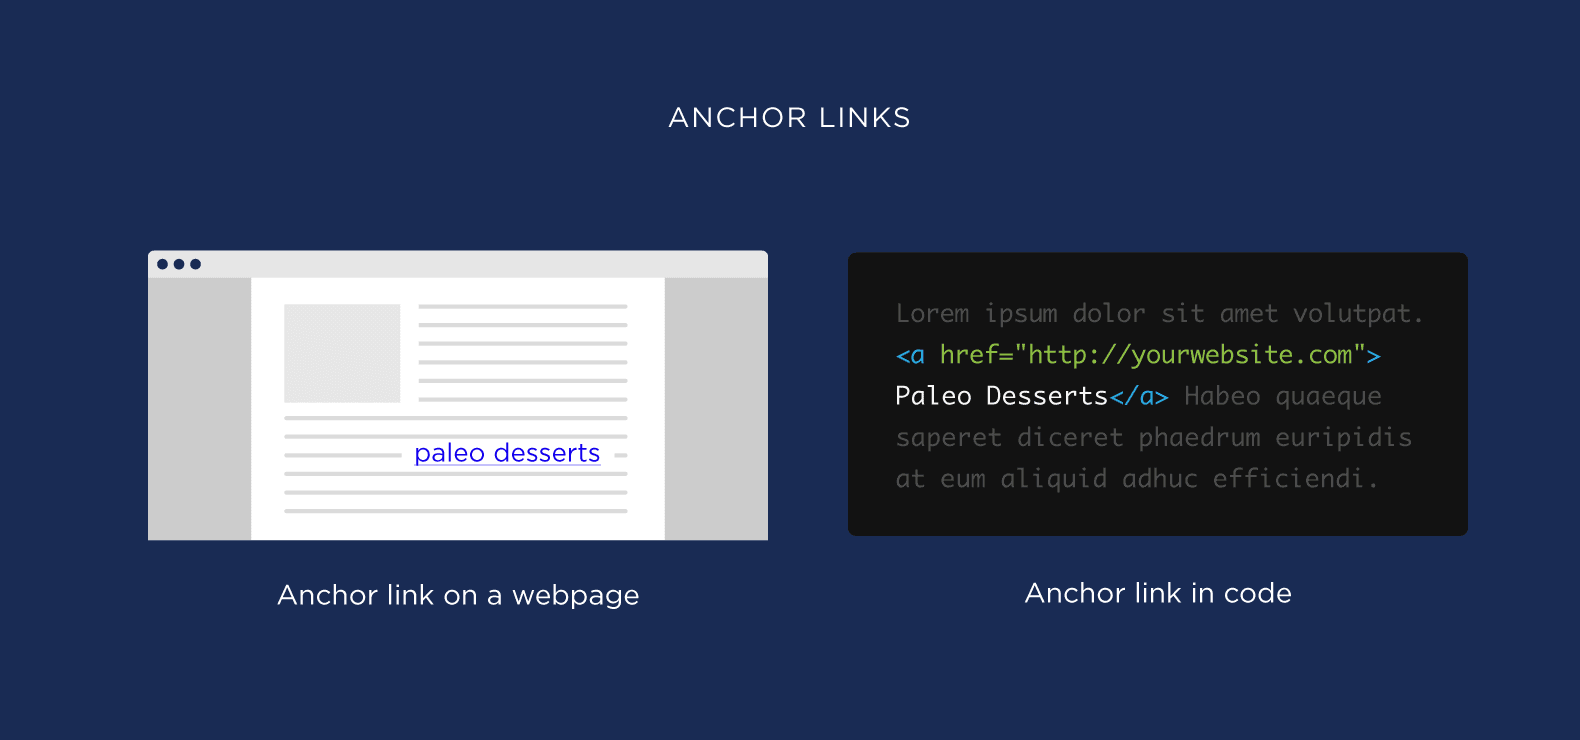 What are anchor links